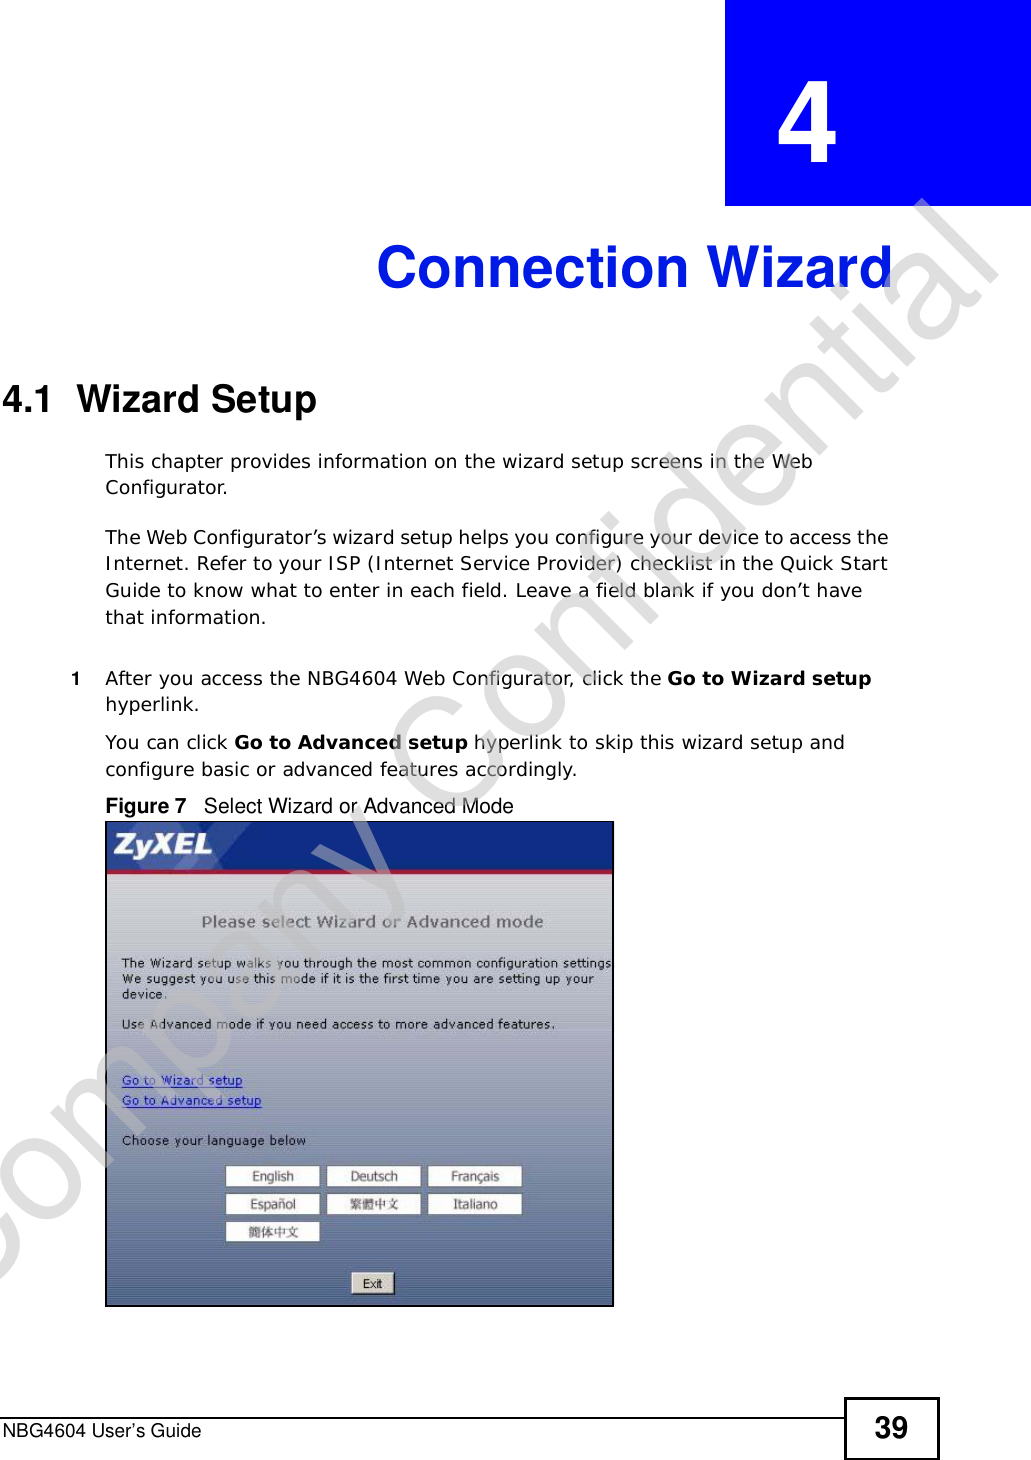 NBG4604 User’s Guide 39CHAPTER  4 Connection Wizard4.1  Wizard SetupThis chapter provides information on the wizard setup screens in the Web Configurator.The Web Configurator’s wizard setup helps you configure your device to access the Internet. Refer to your ISP (Internet Service Provider) checklist in the Quick Start Guide to know what to enter in each field. Leave a field blank if you don’t have that information.1After you access the NBG4604 Web Configurator, click the Go to Wizard setuphyperlink.You can click Go to Advanced setup hyperlink to skip this wizard setup and configure basic or advanced features accordingly.Figure 7   Select Wizard or Advanced ModeCompany Confidential